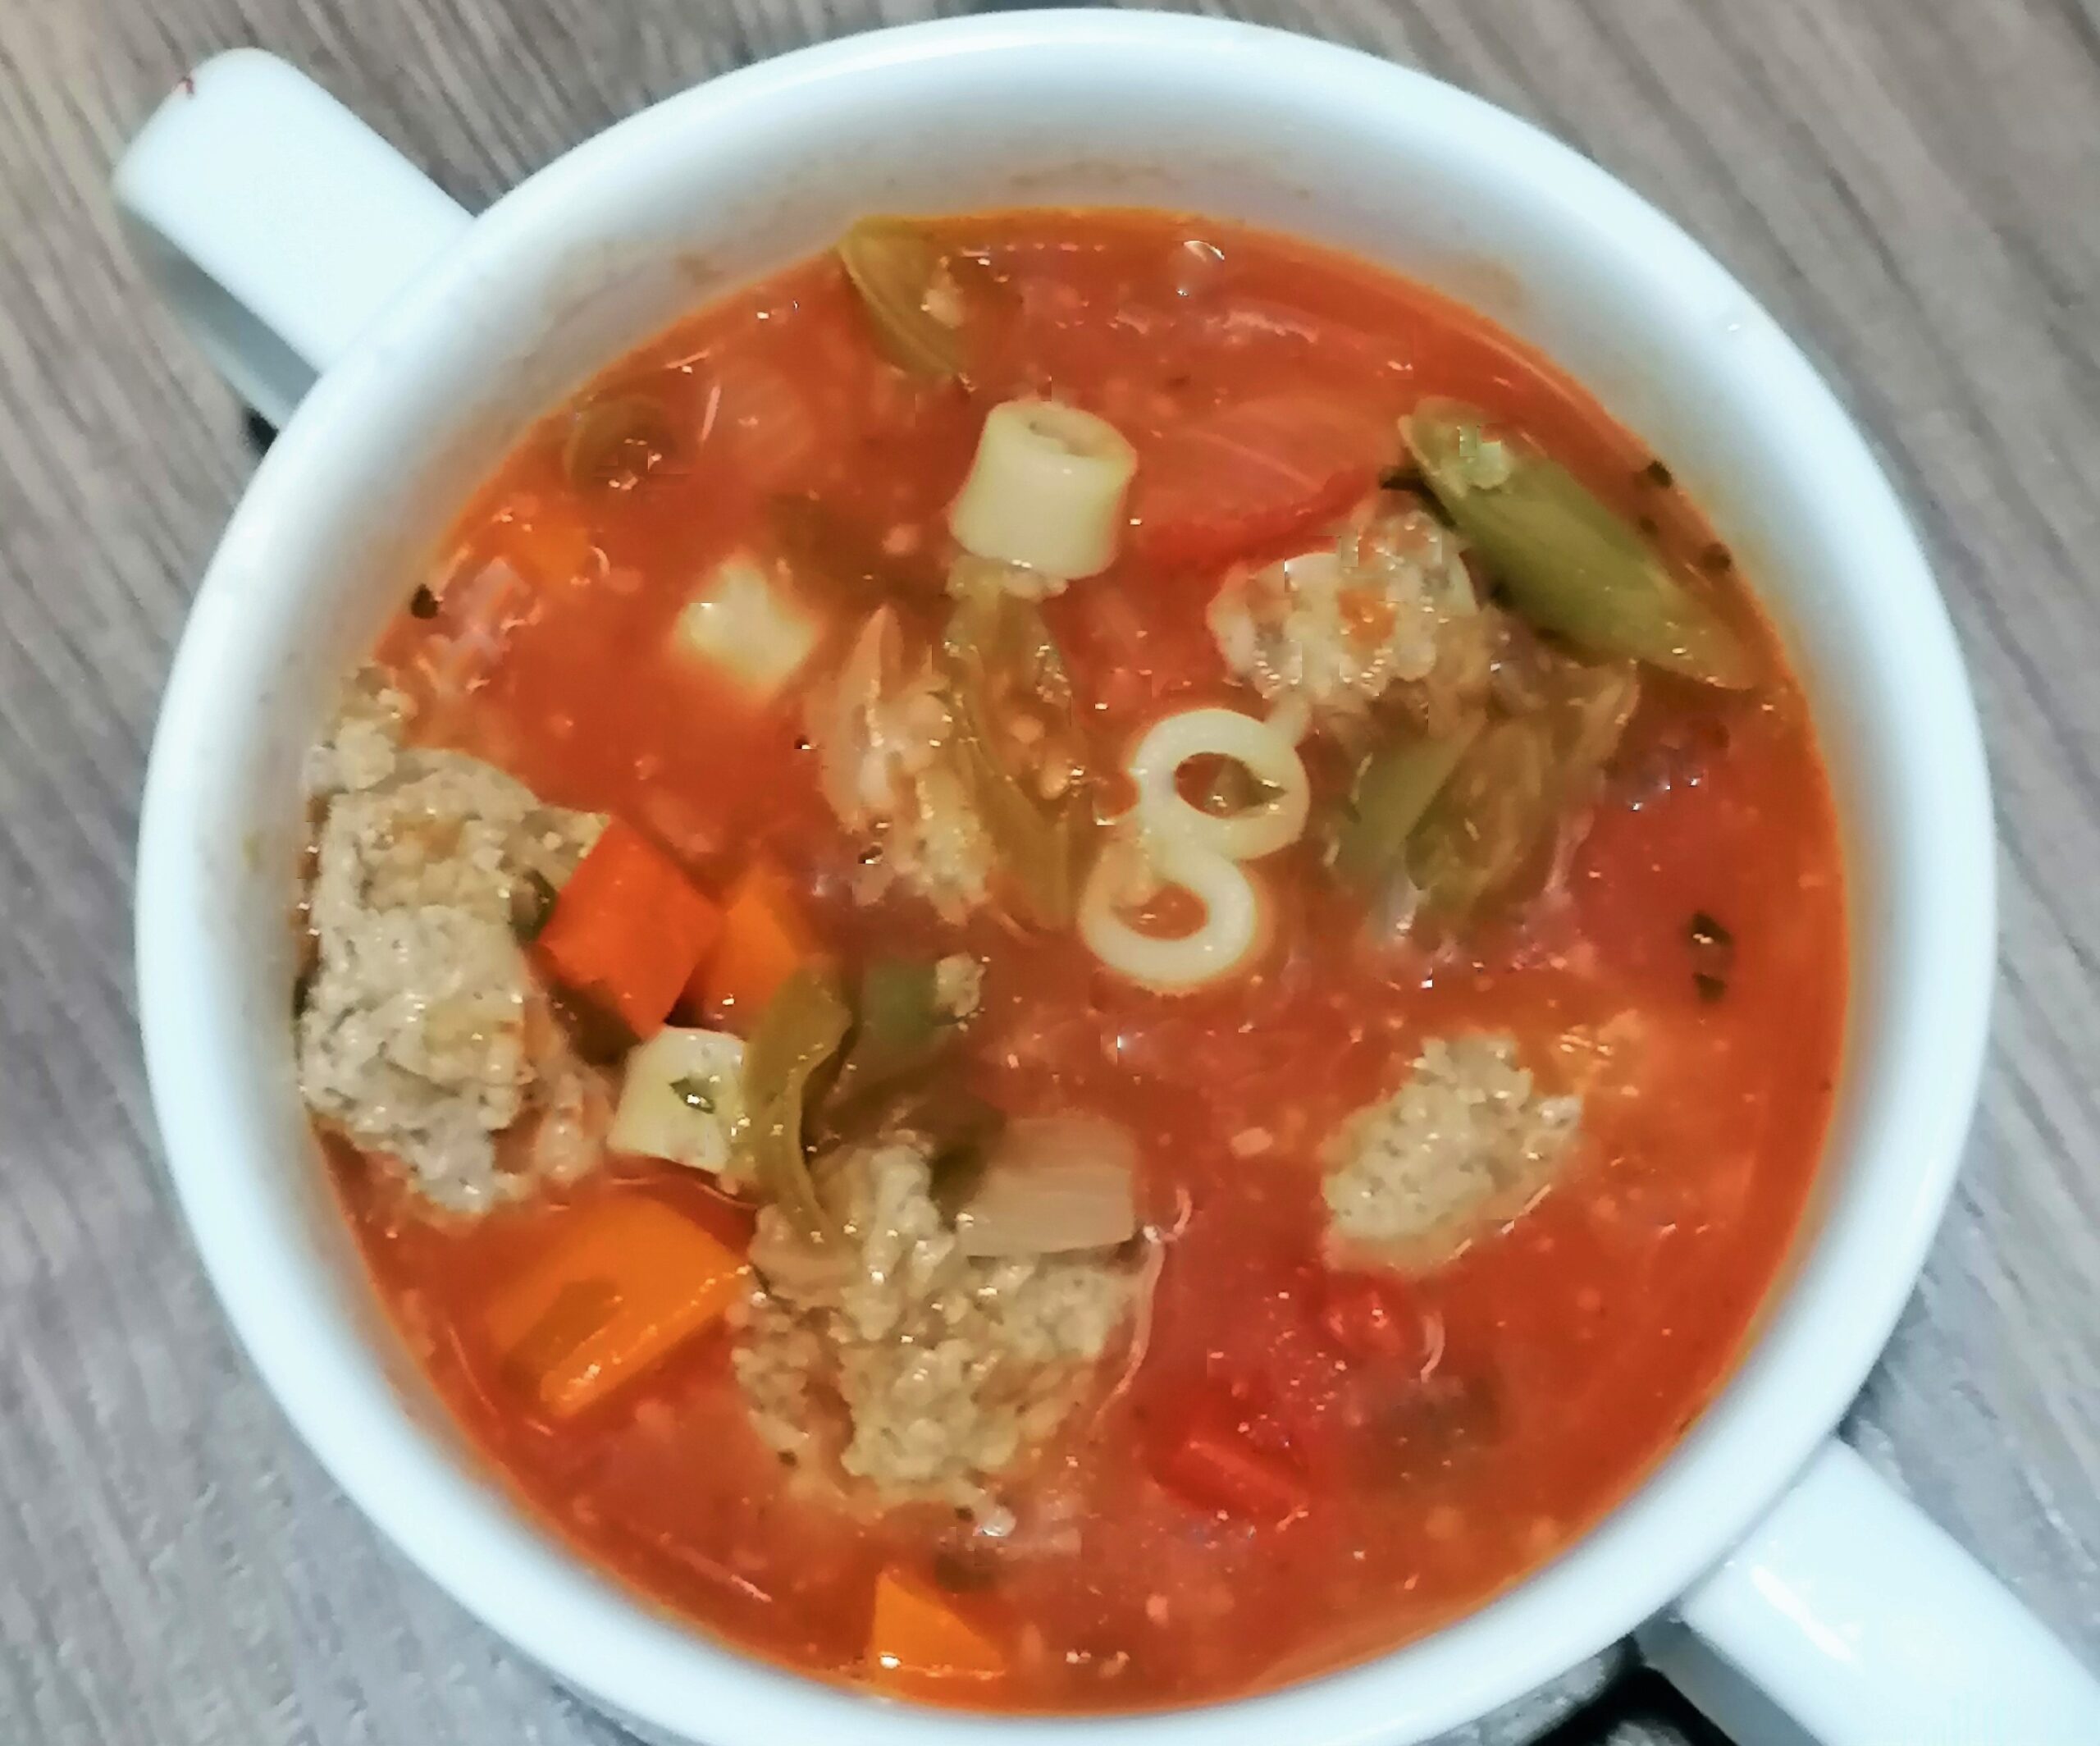 Tomato-based vegetable soup with meatballs